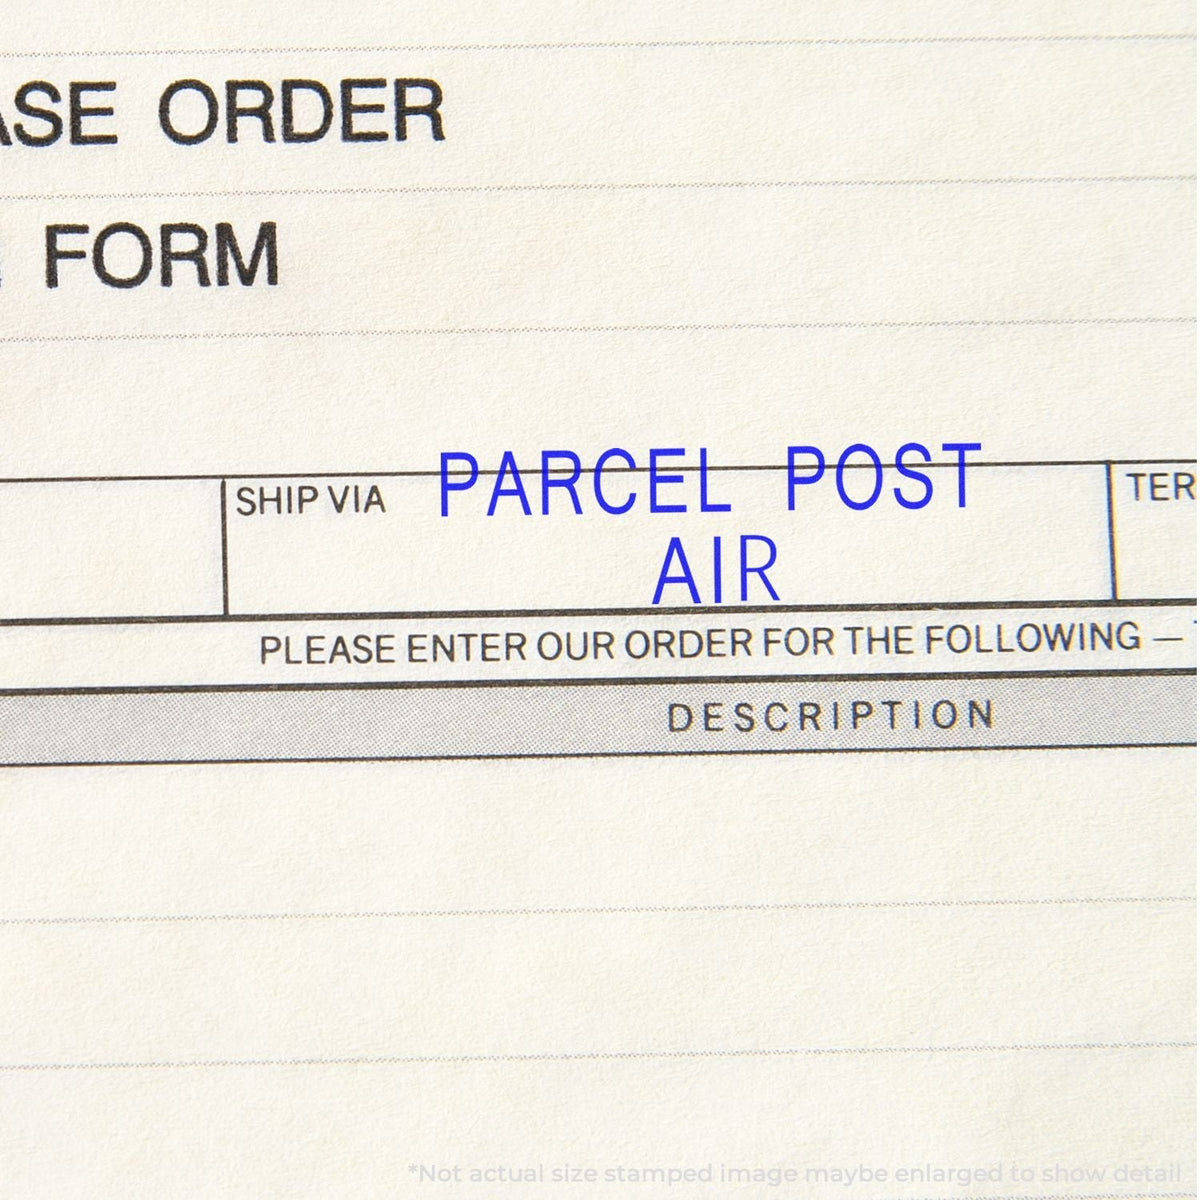 In Use Self-Inking Parcel Post Air Stamp Image